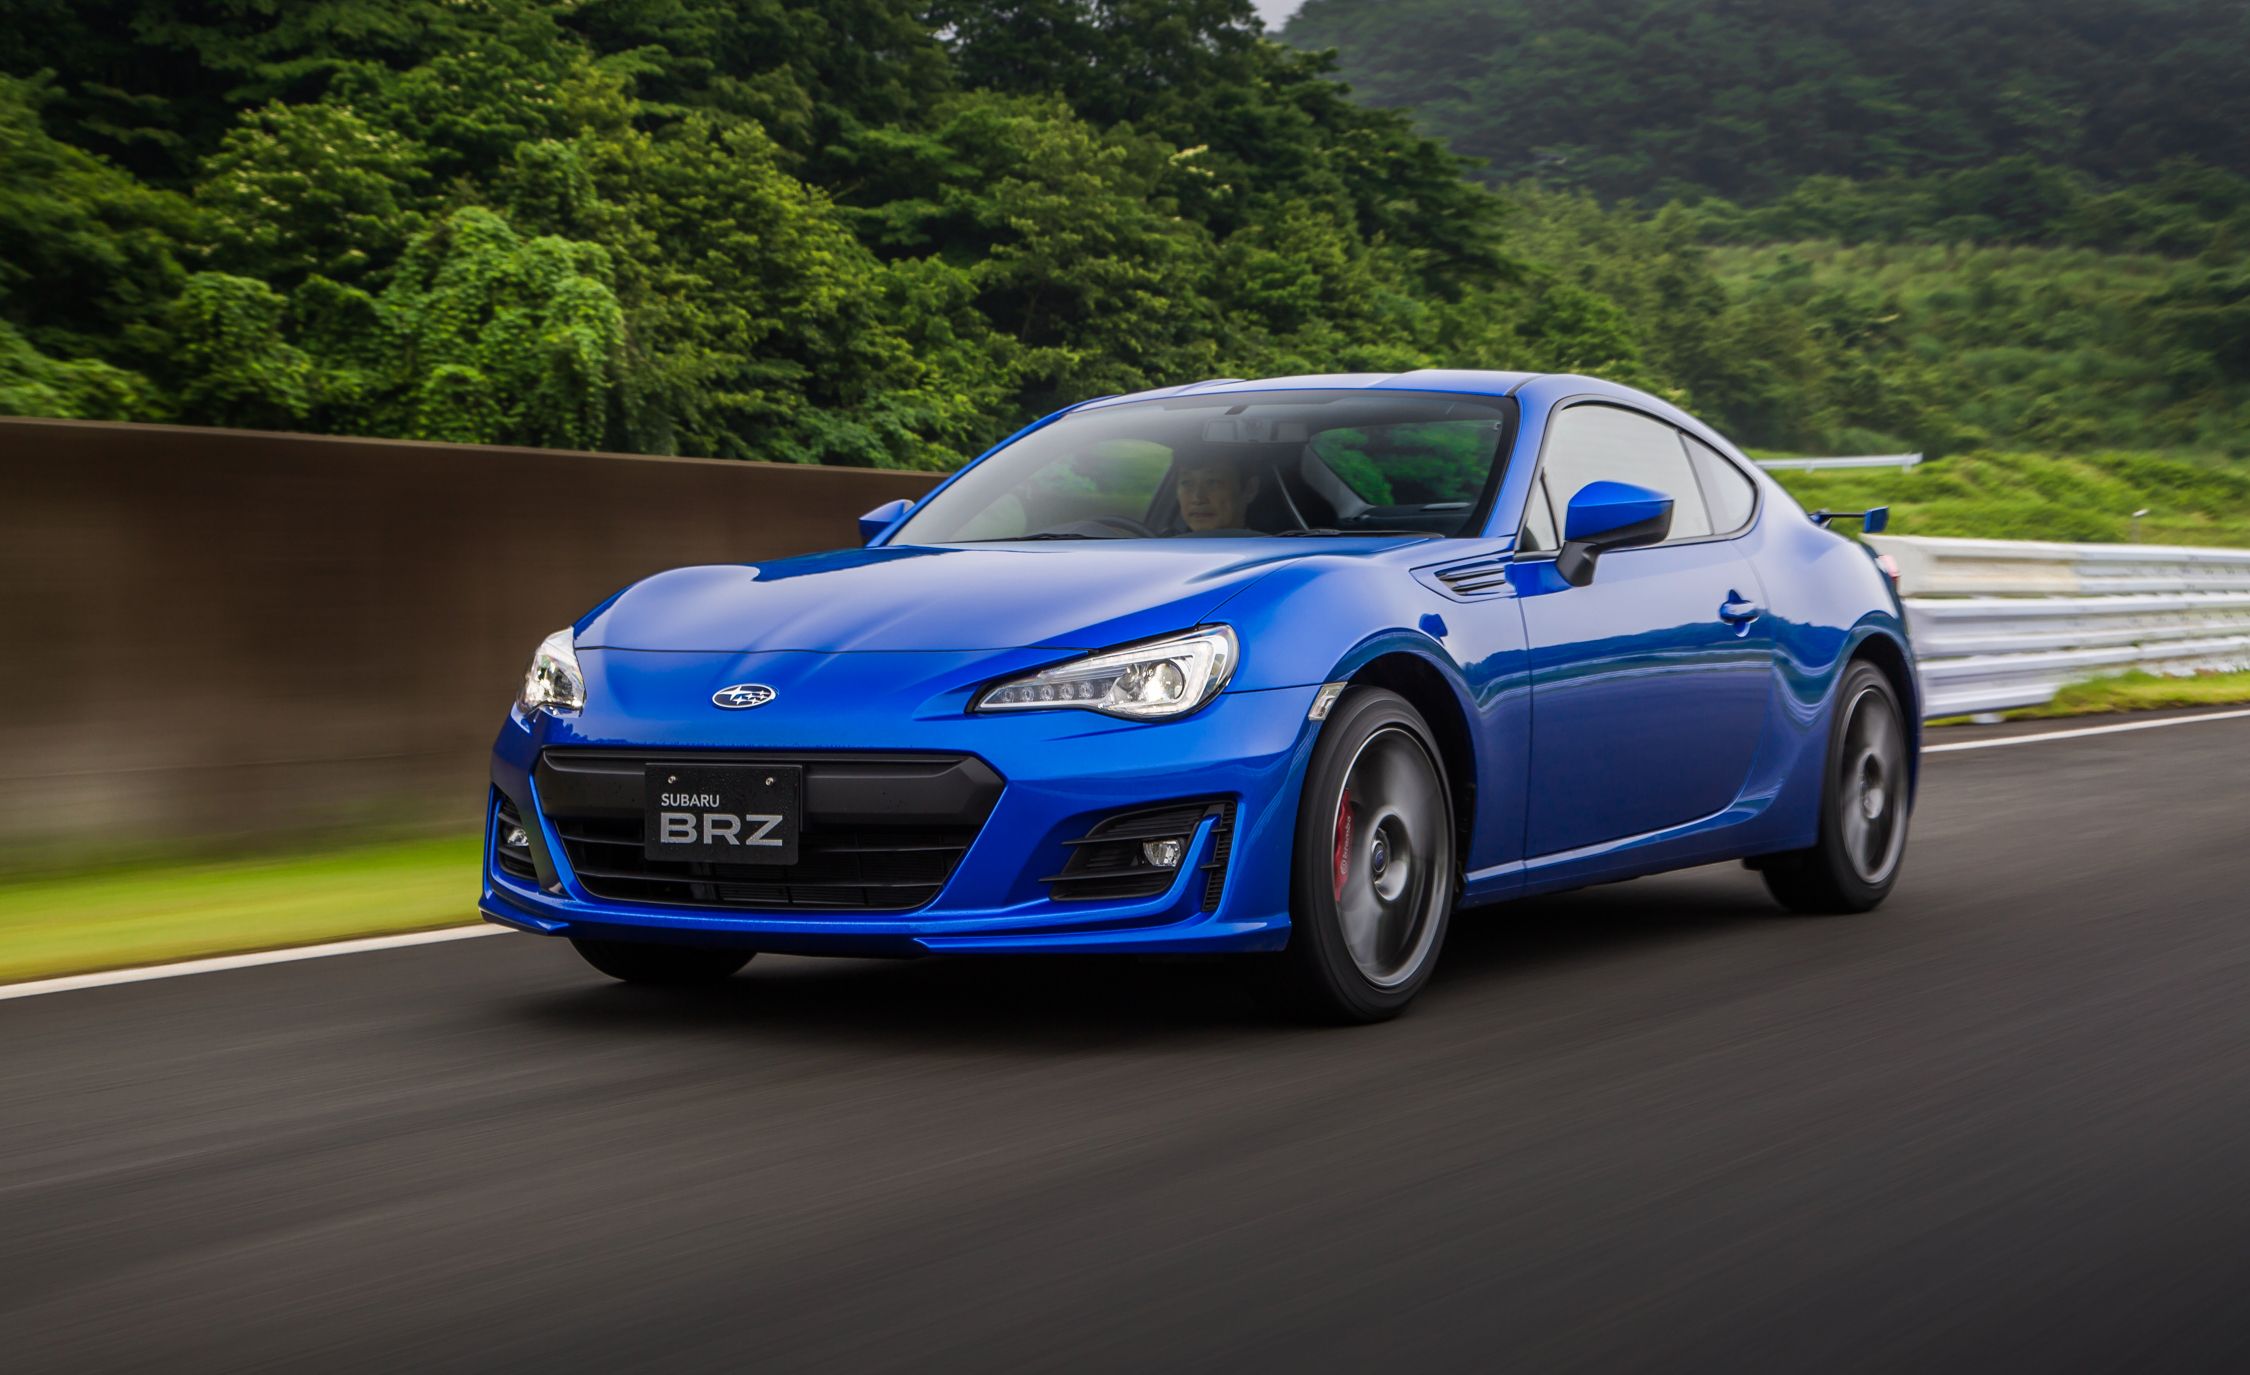 2017 Subaru Brz Jdm Spec Pictures Photo Gallery Car And Driver